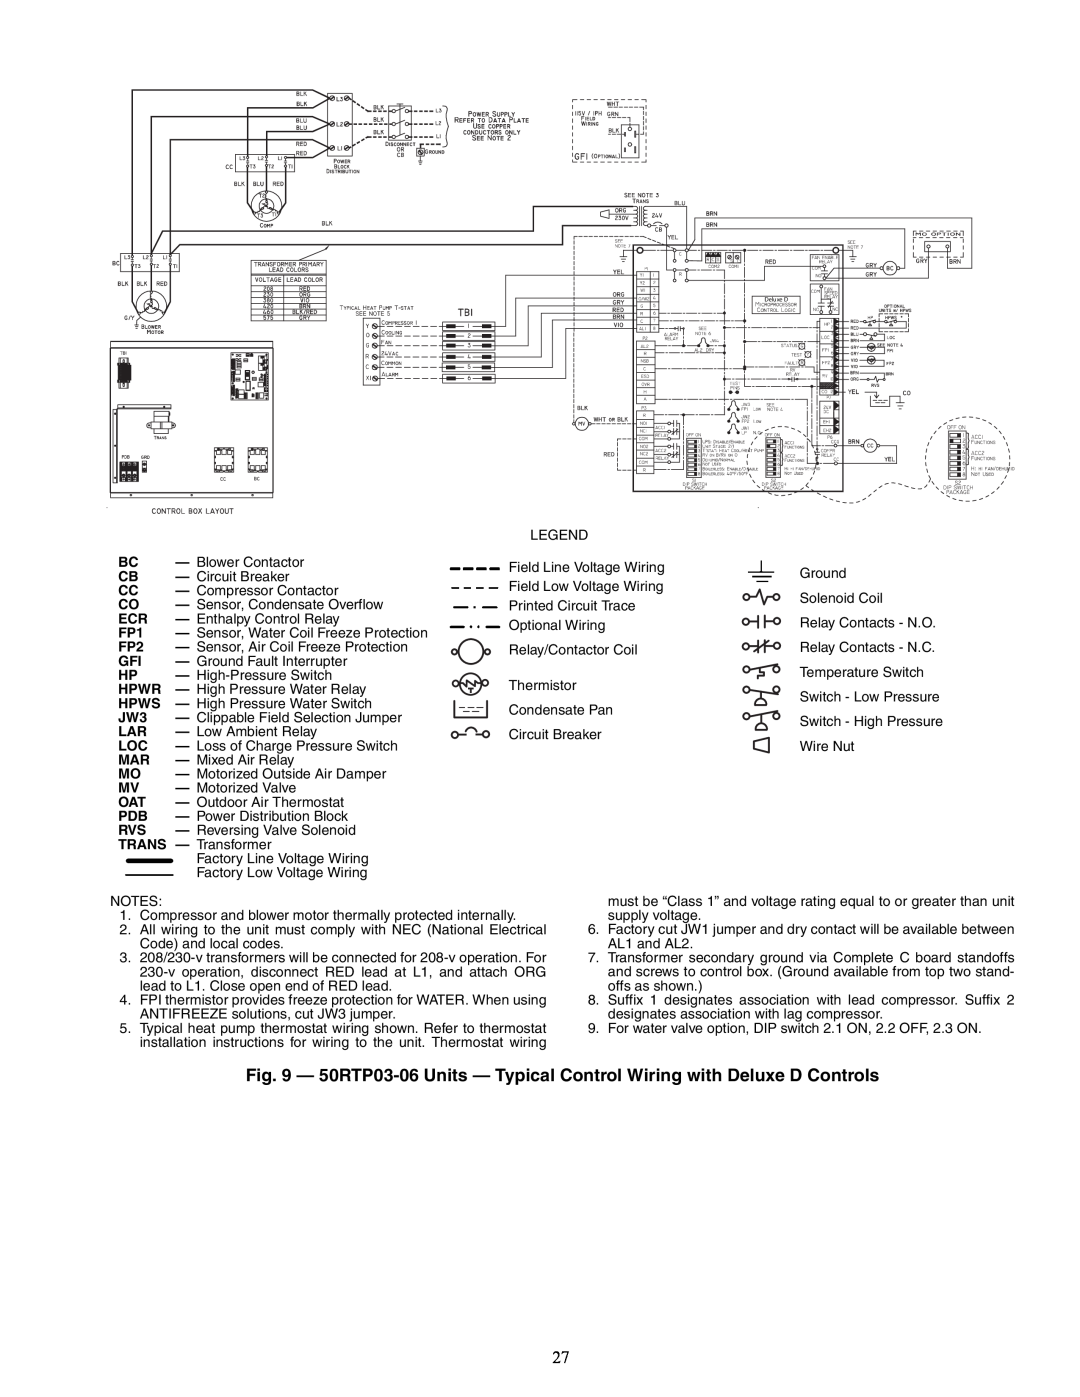 Carrier 50RTP03-20 specifications Circuit Breaker, a50-8556 